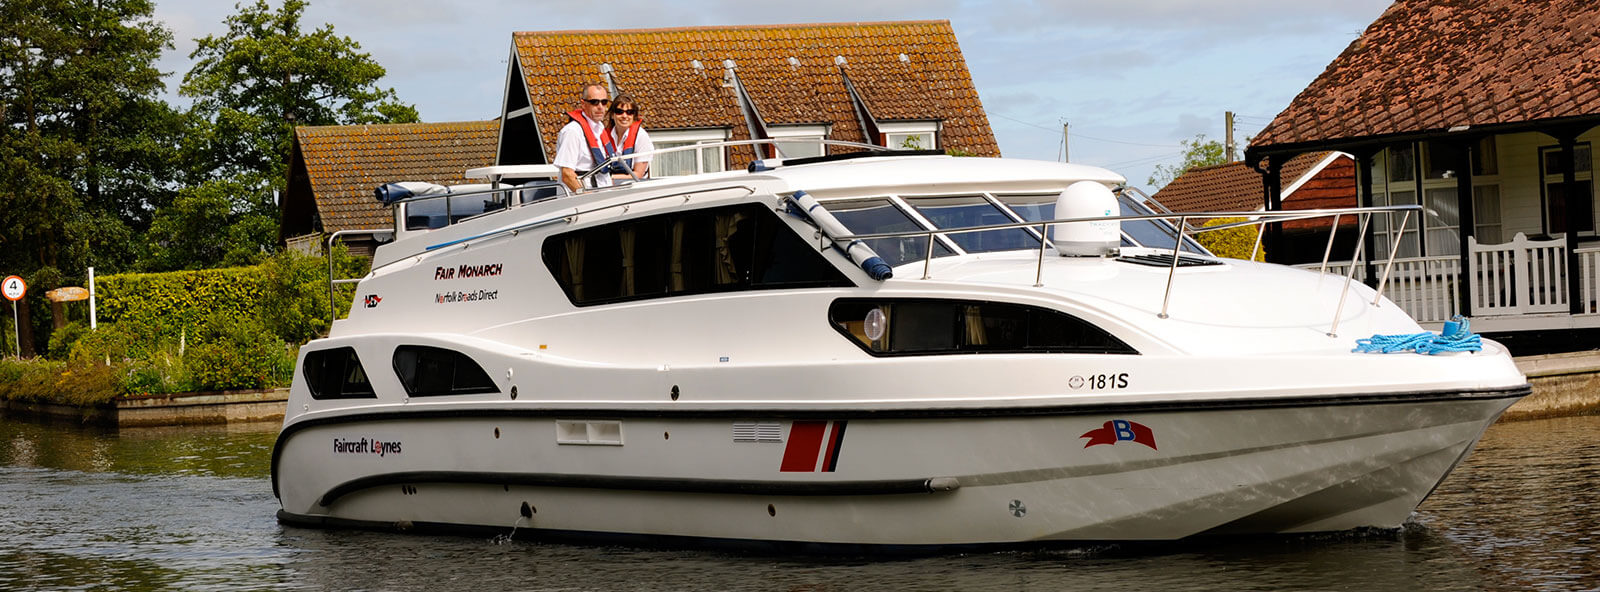 A couple cruising as part of a norfolk broads boat hire